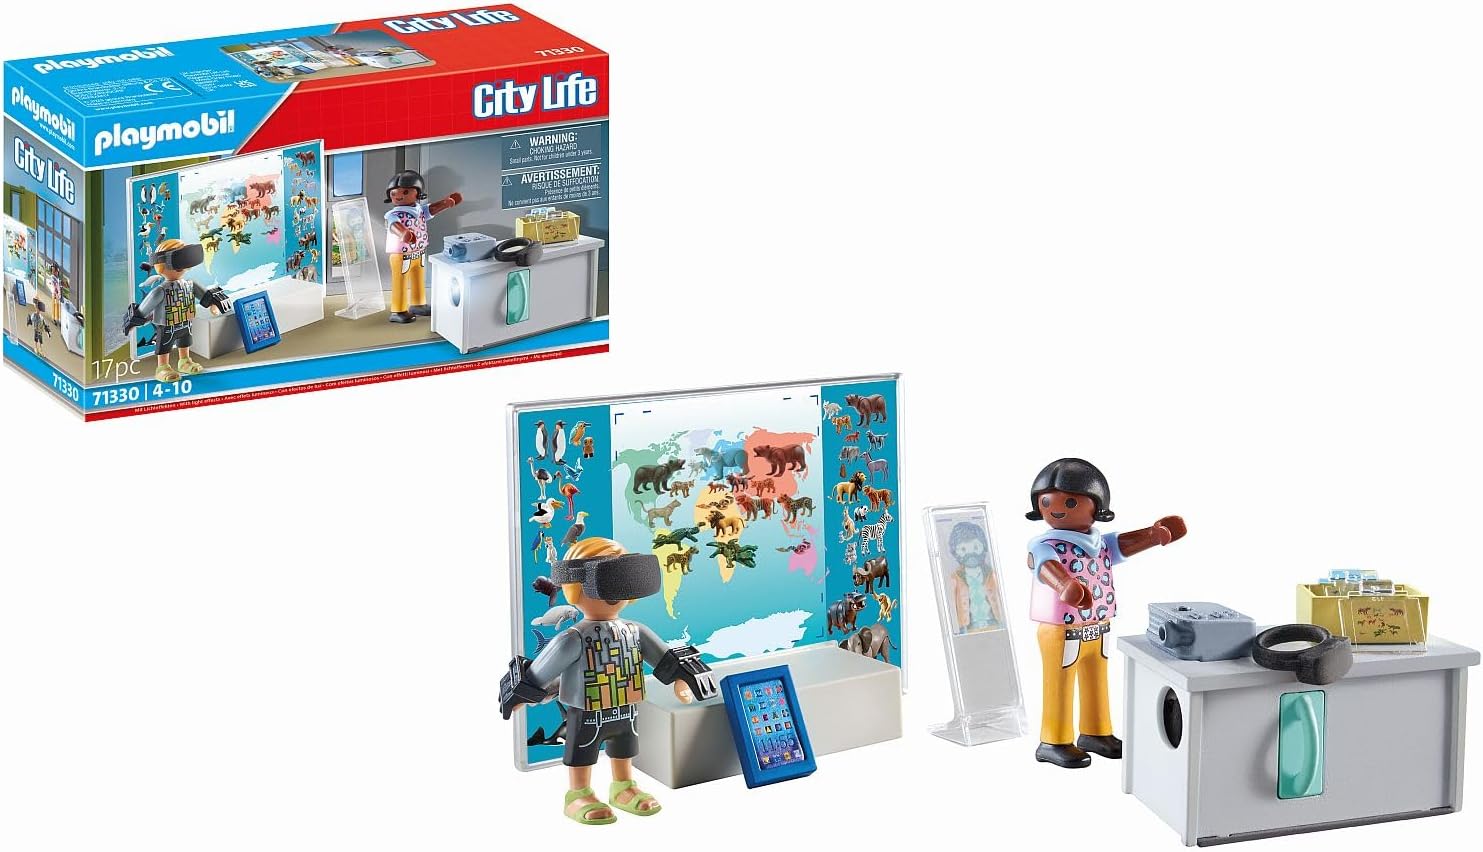 PLAYMOBIL City Life 71330 Virtual Classroom, Working Projector, Tablet and VR Glasses for Creative Role Play, Toy for Children from 4 Years